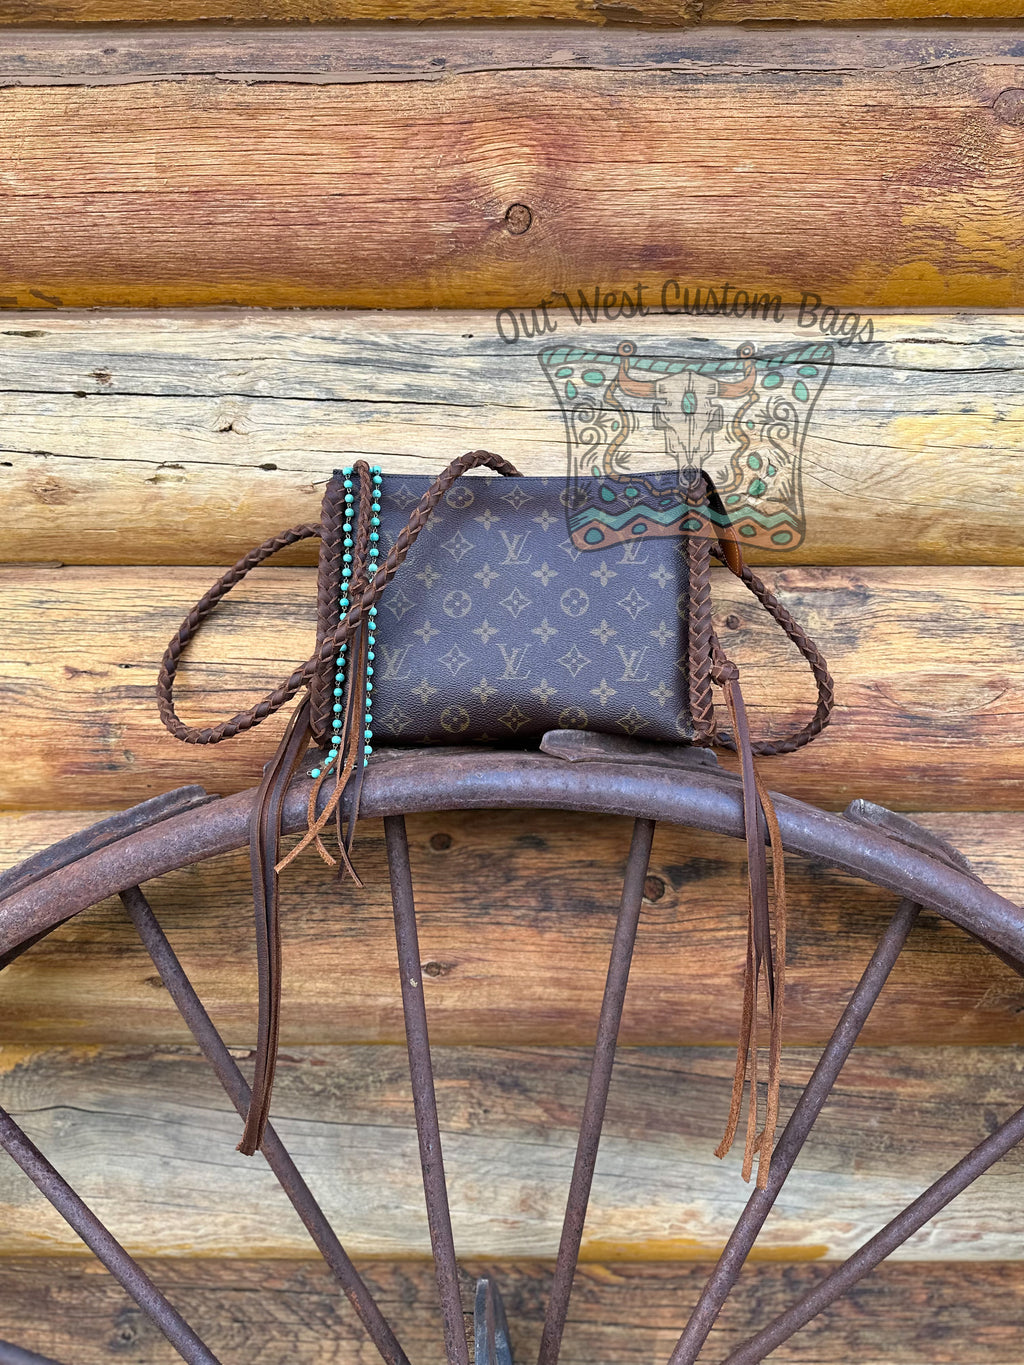 Out West GM Pouch Wristlet/Crossbody Revamped Leather Braiding